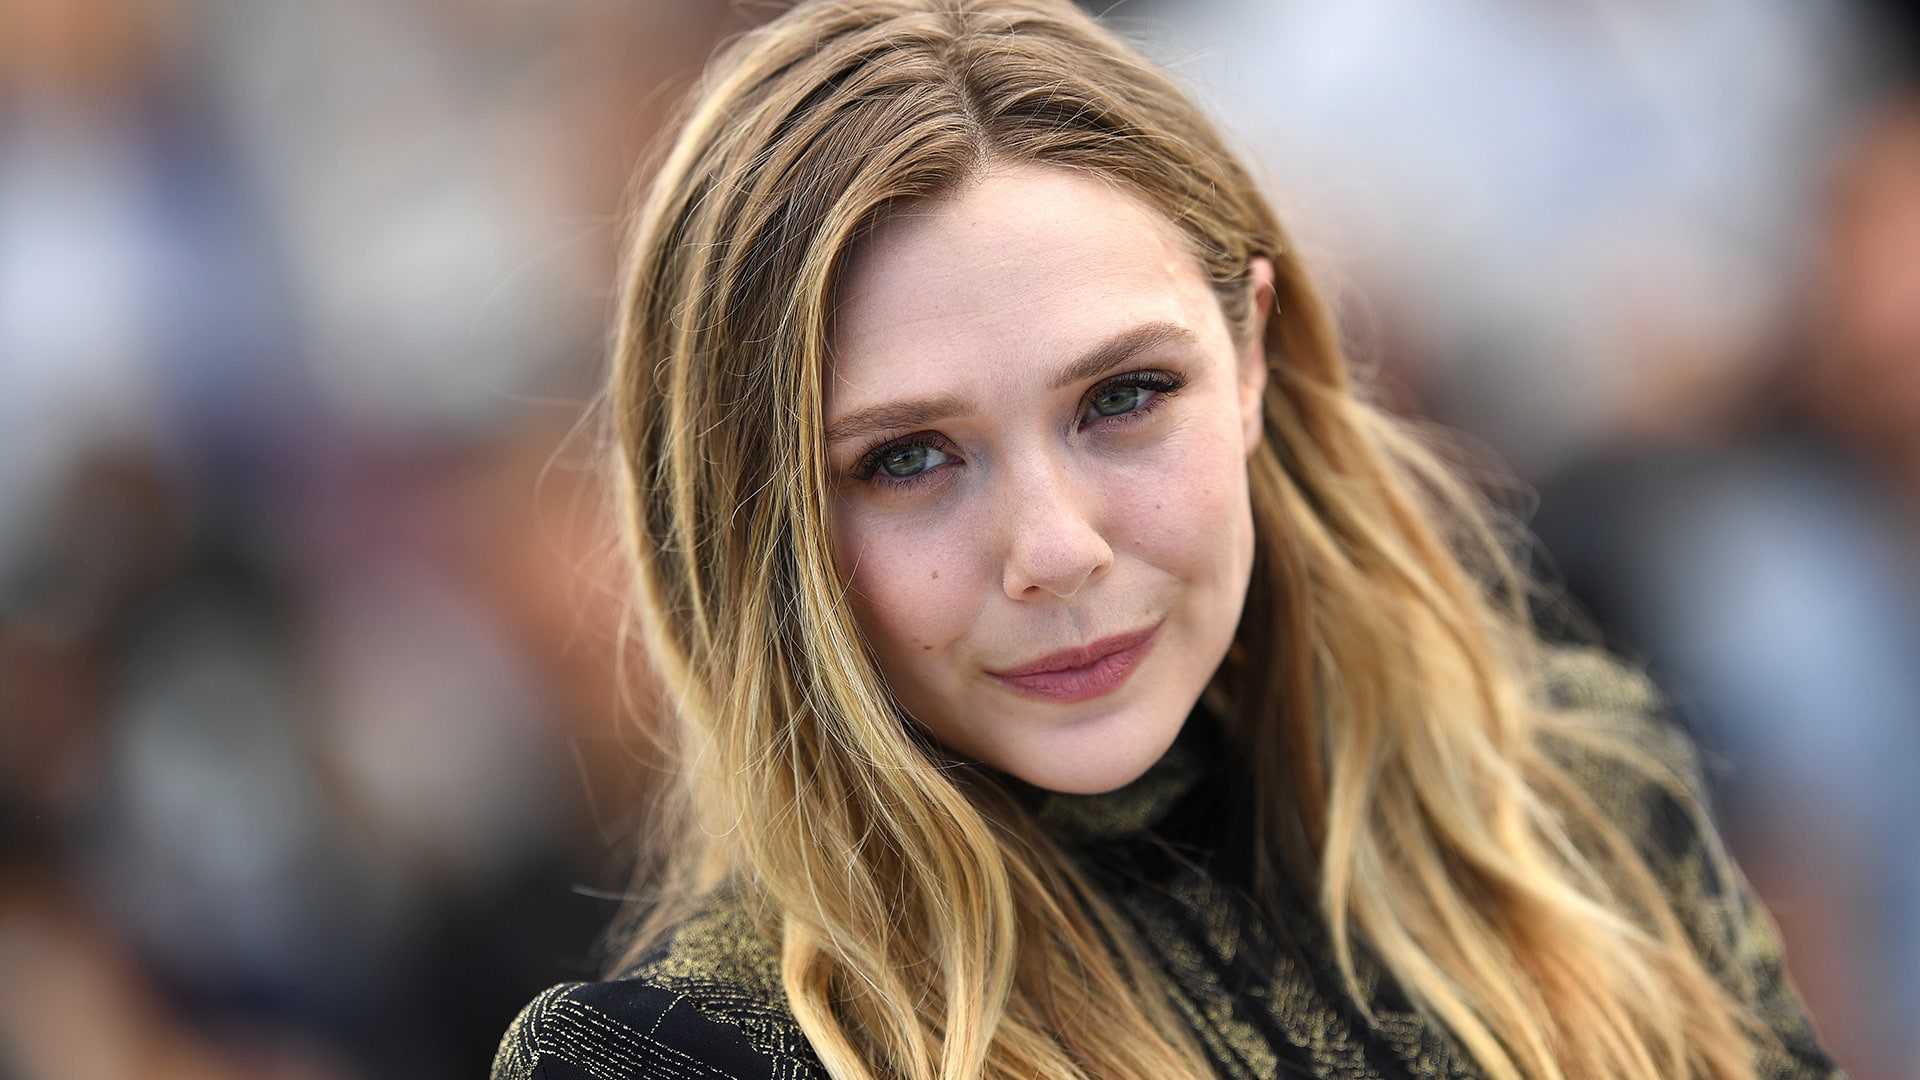 Elizabeth Olsen wants to do more indie movies. Pic courtesy: stylecaster.com